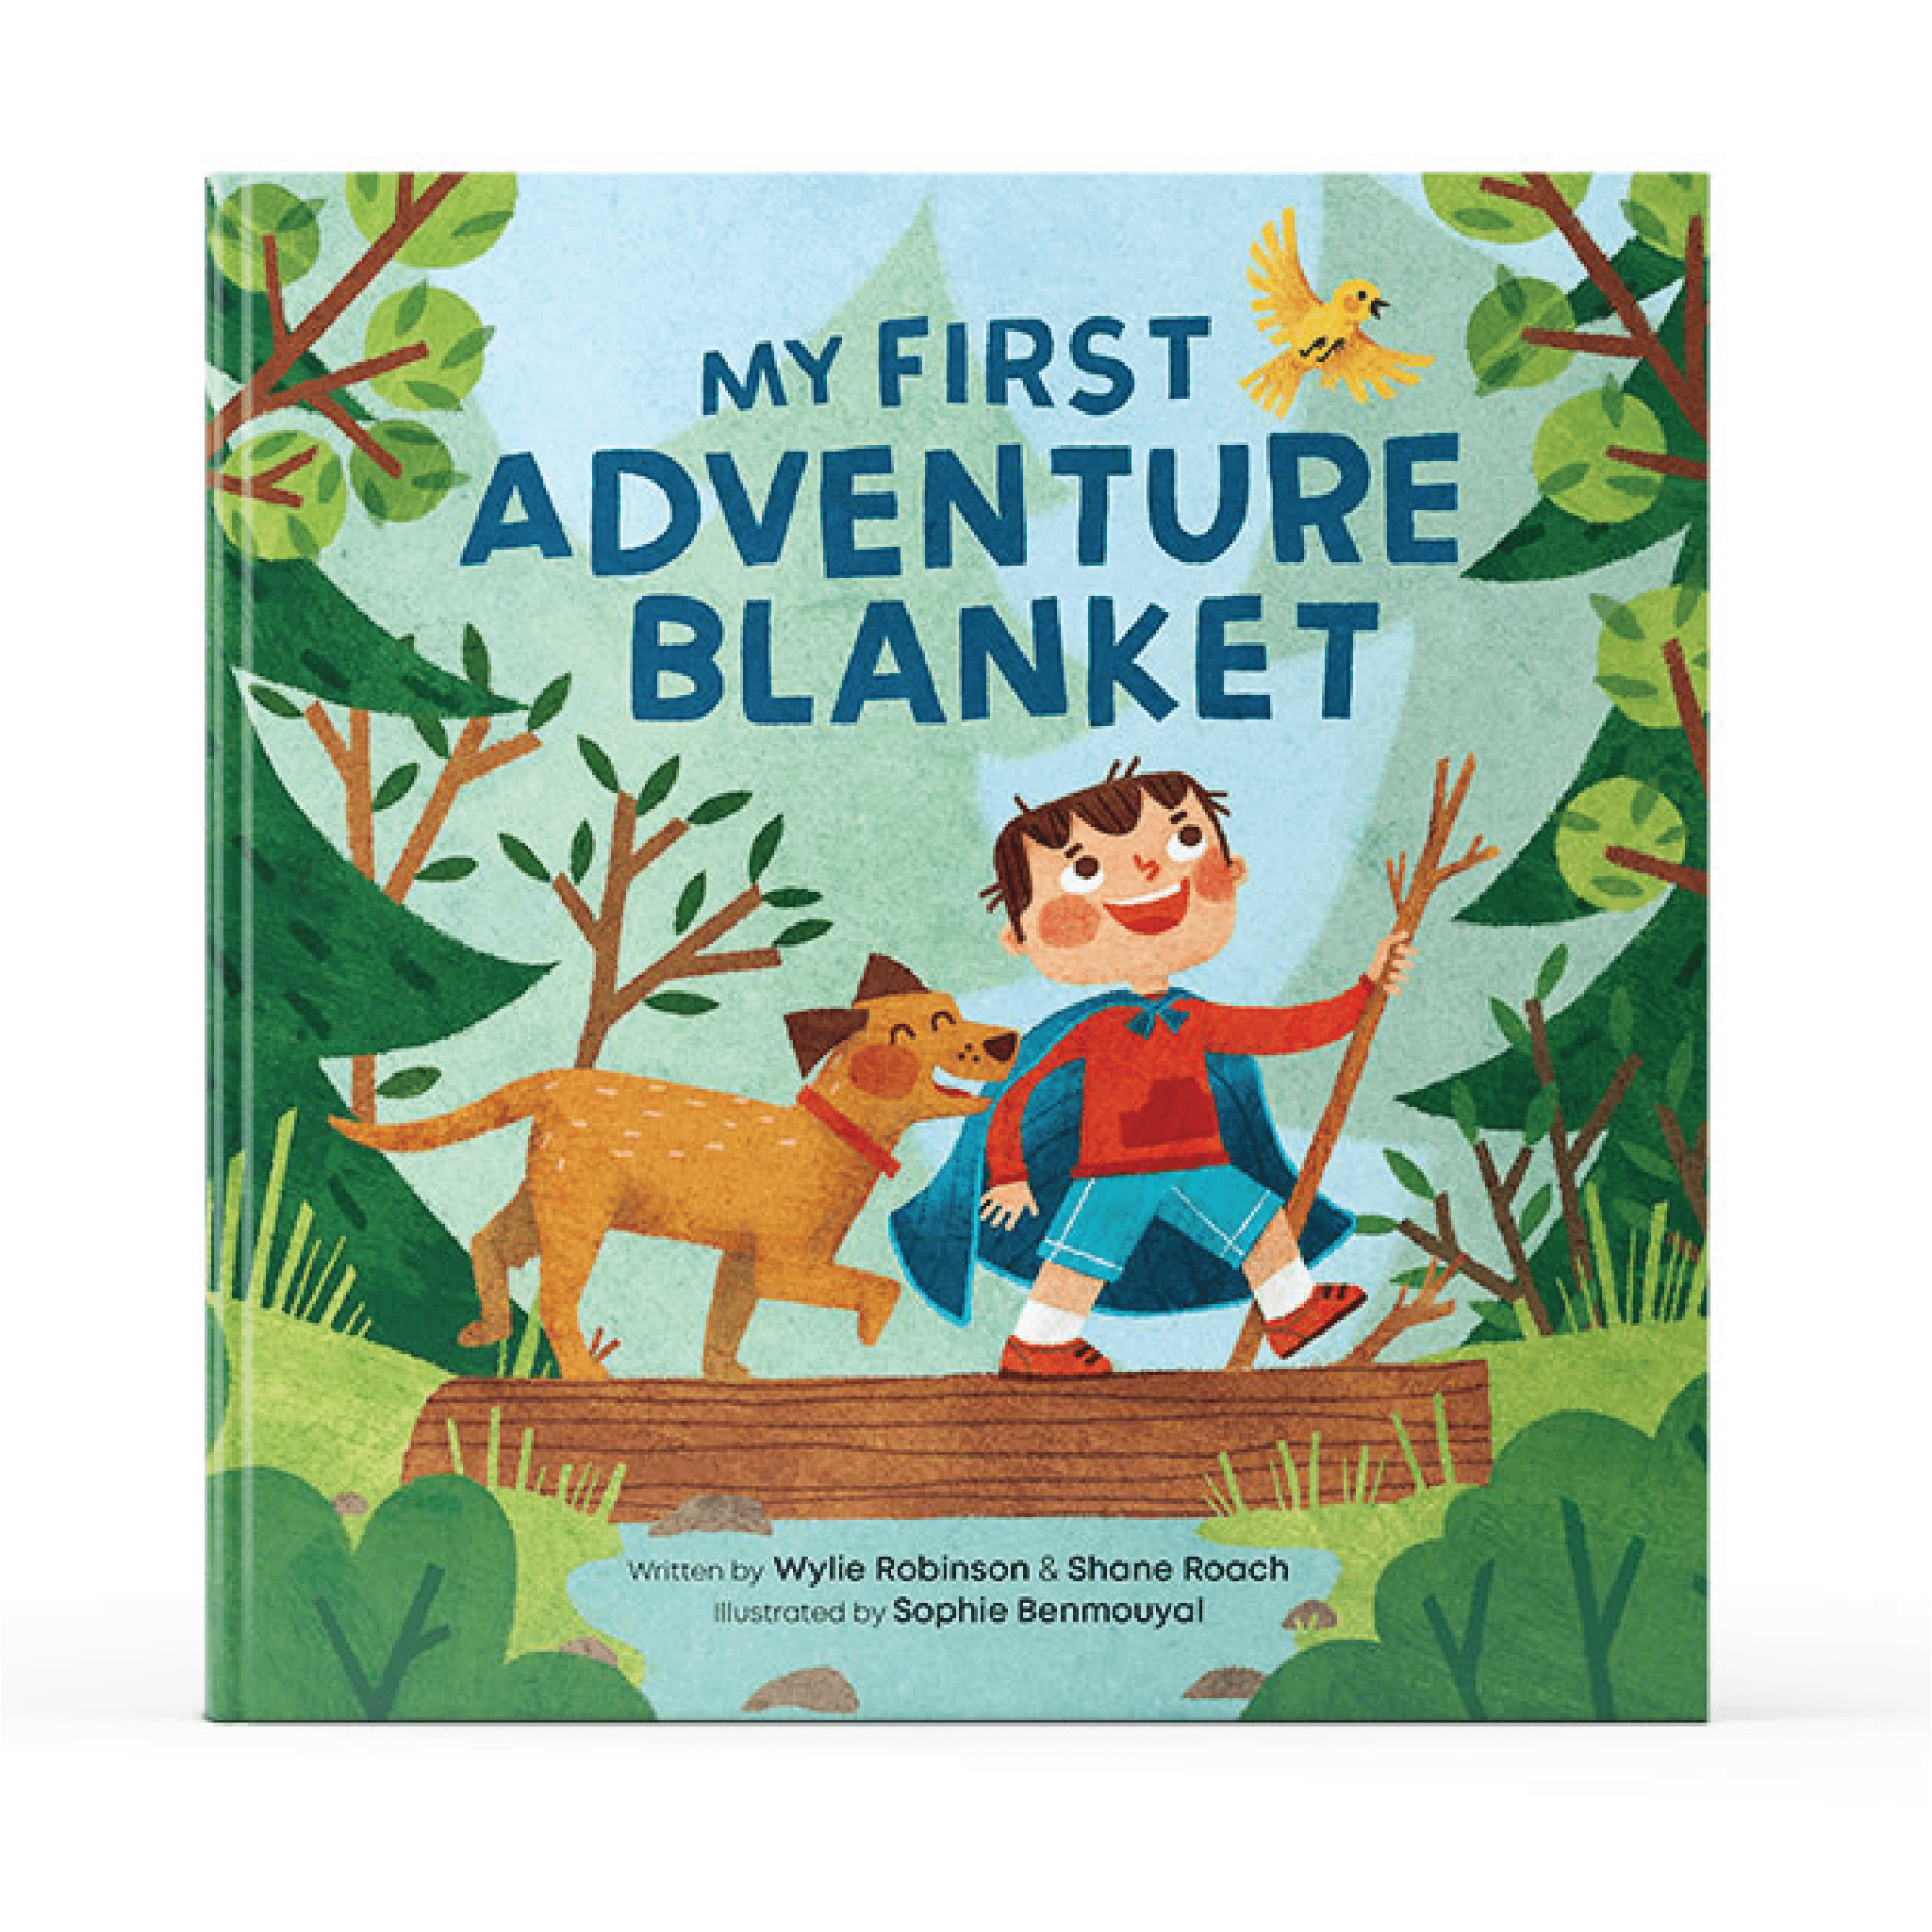 Cover of My First Adventure Blanket Book by Wylie Robinson and Shane Roach